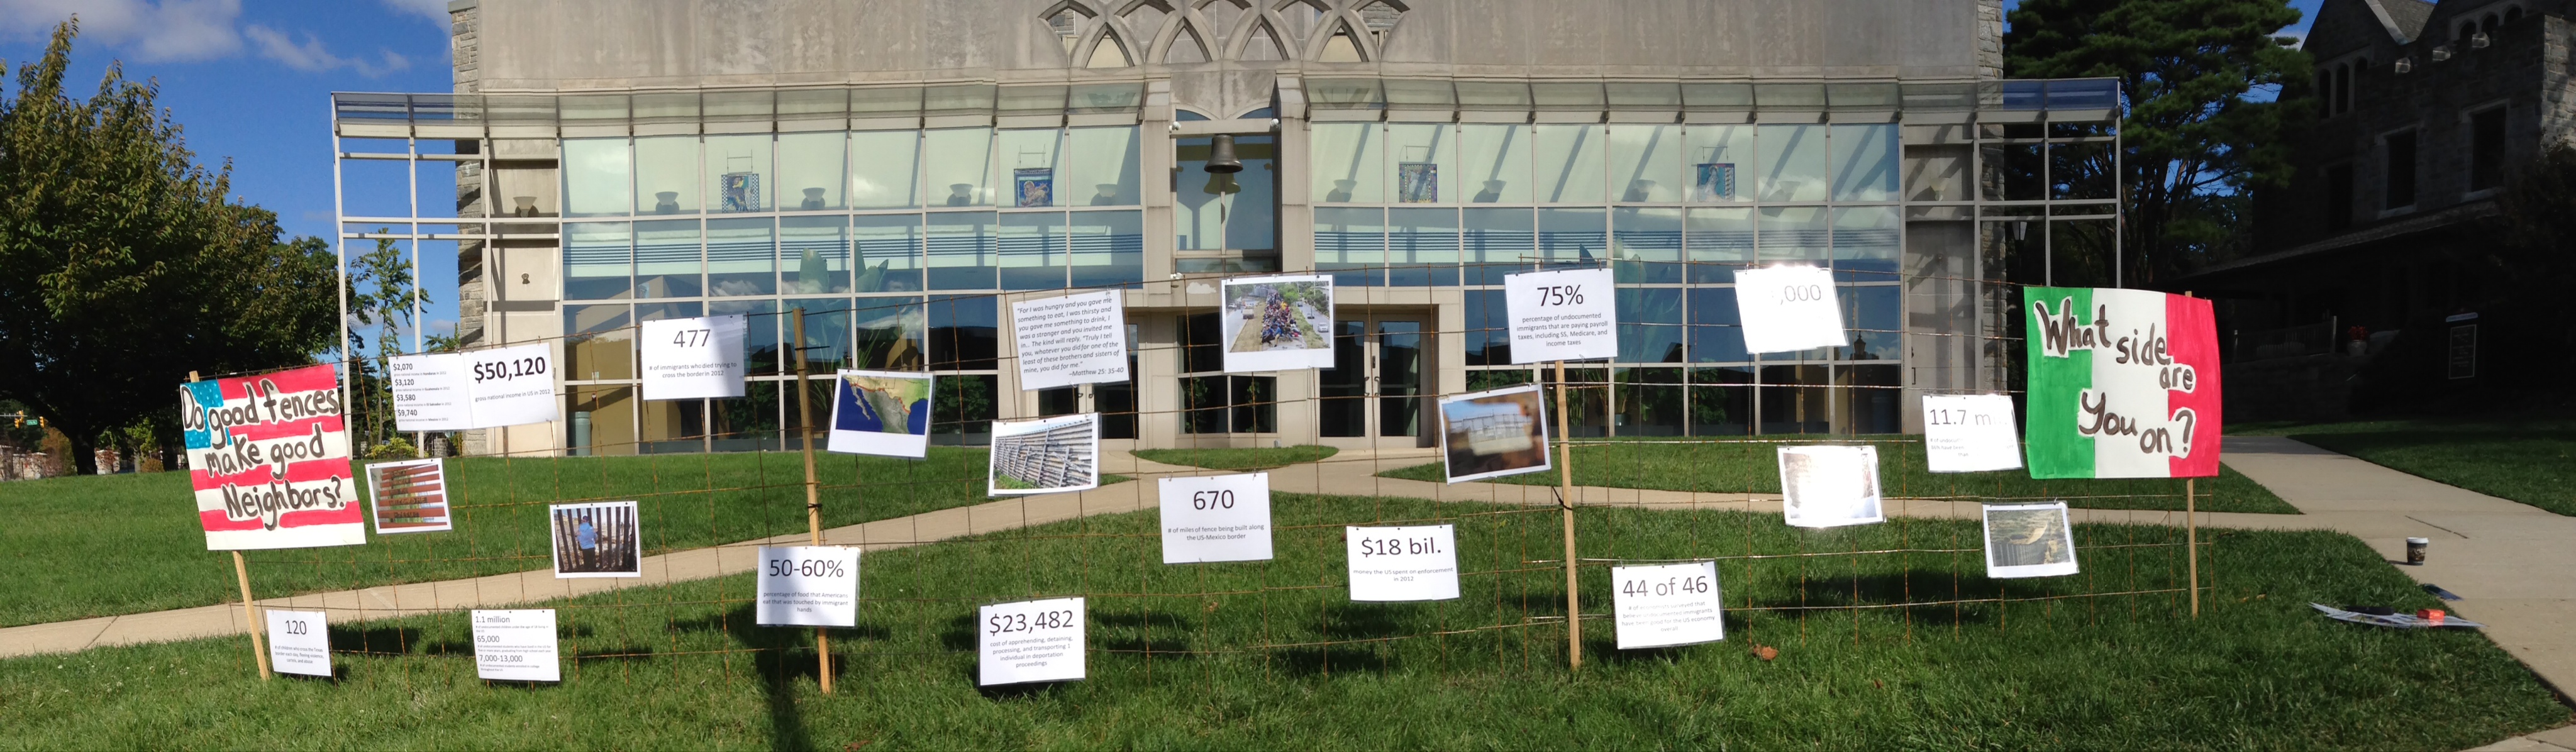 Students at St. Joseph's University built a fence in the middle of their campus as a symbol of the division caused by our current immigration policy. The fence features images and statistics related to the immigration debate. 